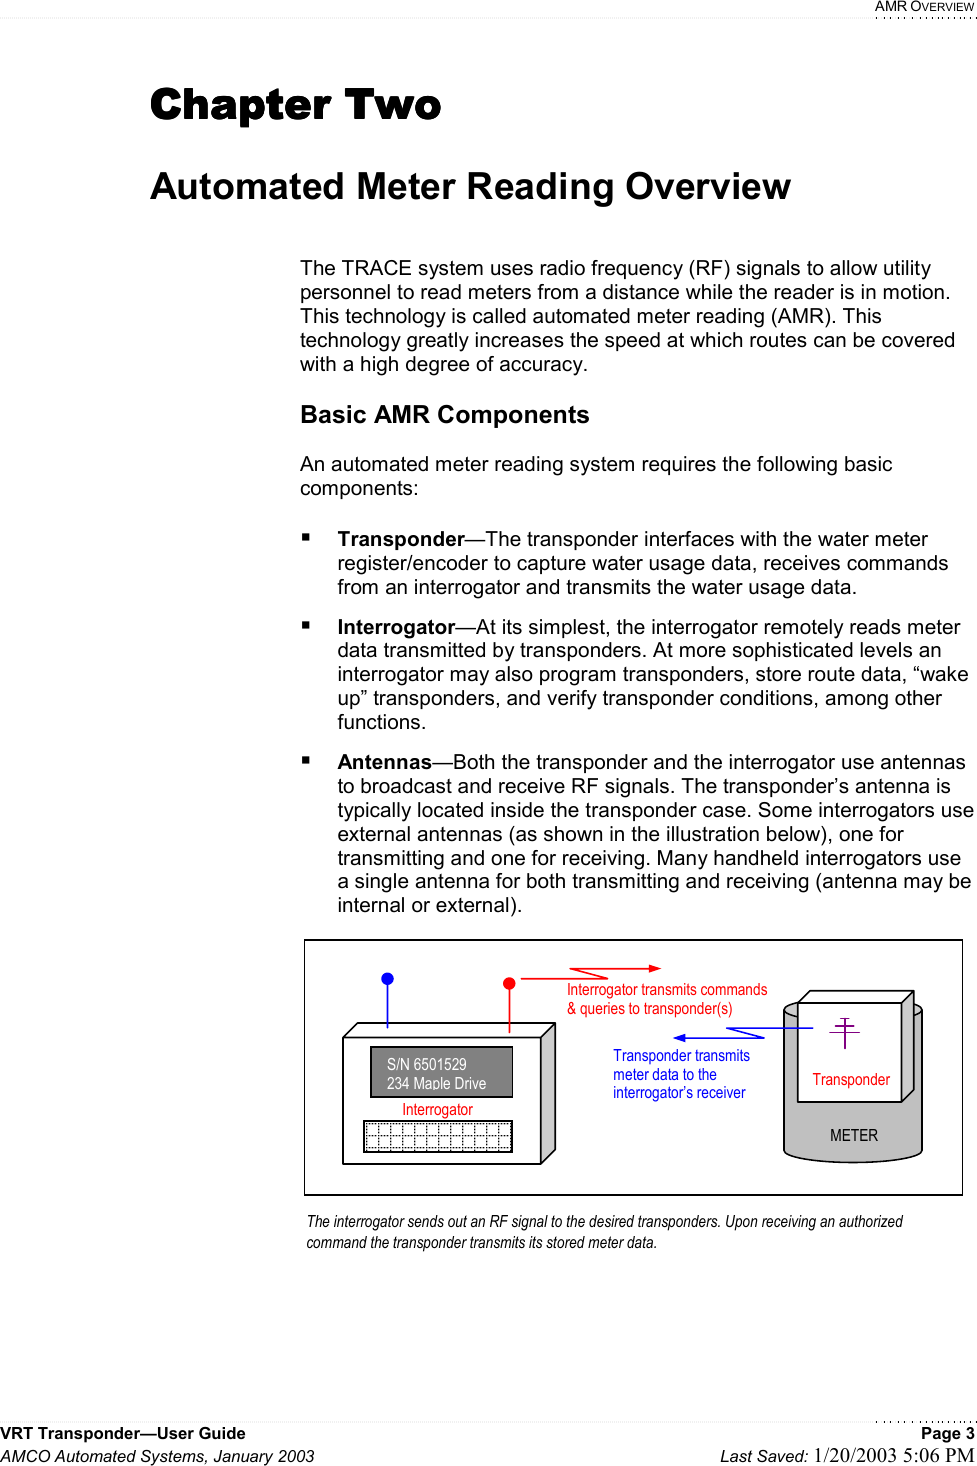   AMR OVERVIEW VRT Transponder—User Guide    Page 3 AMCO Automated Systems, January 2003    Last Saved: 1/20/2003 5:06 PM  Chapter TwoChapter TwoChapter TwoChapter Two     Automated Meter Reading Overview   The TRACE system uses radio frequency (RF) signals to allow utility personnel to read meters from a distance while the reader is in motion. This technology is called automated meter reading (AMR). This technology greatly increases the speed at which routes can be covered with a high degree of accuracy.  Basic AMR Components  An automated meter reading system requires the following basic components:   Transponder—The transponder interfaces with the water meter register/encoder to capture water usage data, receives commands from an interrogator and transmits the water usage data.  Interrogator—At its simplest, the interrogator remotely reads meter data transmitted by transponders. At more sophisticated levels an interrogator may also program transponders, store route data, “wake up” transponders, and verify transponder conditions, among other functions.  Antennas—Both the transponder and the interrogator use antennas to broadcast and receive RF signals. The transponder’s antenna is typically located inside the transponder case. Some interrogators use external antennas (as shown in the illustration below), one for transmitting and one for receiving. Many handheld interrogators use a single antenna for both transmitting and receiving (antenna may be internal or external).                TransponderMETERThe interrogator sends out an RF signal to the desired transponders. Upon receiving an authorized command the transponder transmits its stored meter data.  S/N 6501529234 Maple DriveInterrogatorInterrogator transmits commands &amp; queries to transponder(s)  Transponder transmits  meter data to the interrogator’s receiver   